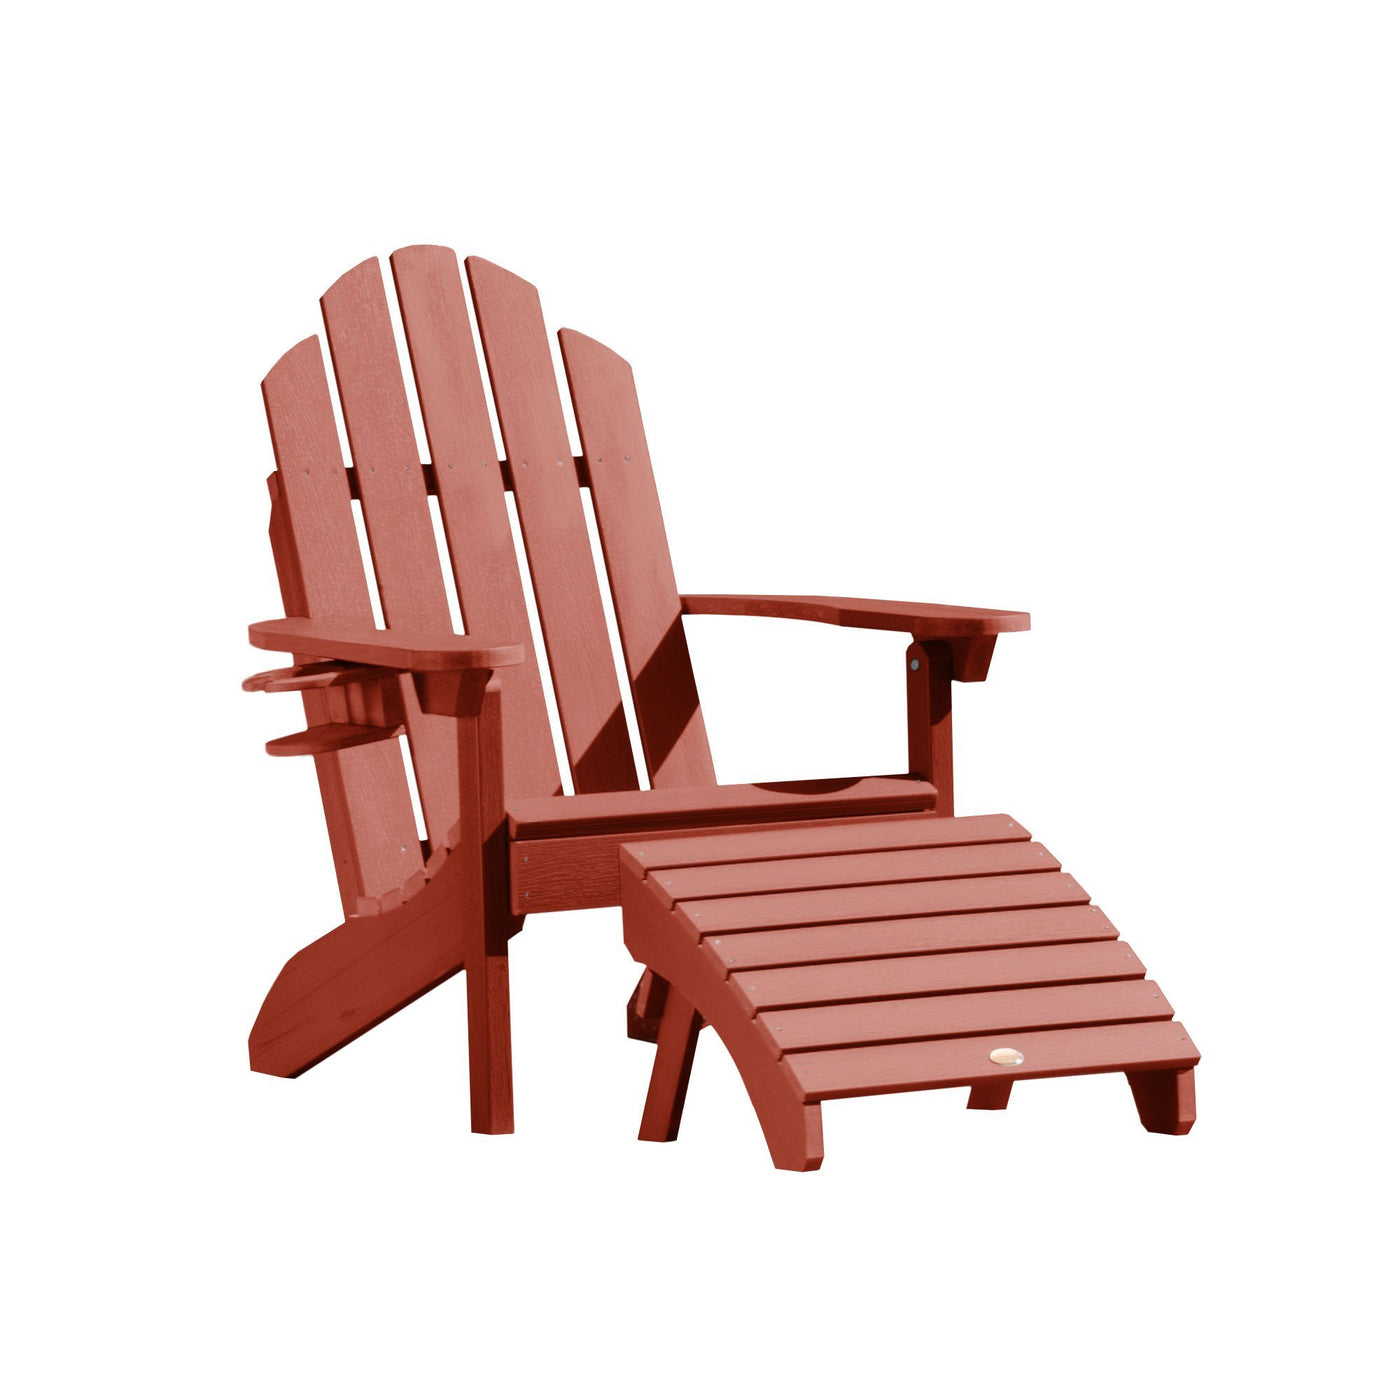 Classic Westport Adirondack Chair with Cup Holder & Folding Adirondack Ottoman Highwood USA Rustic Red 